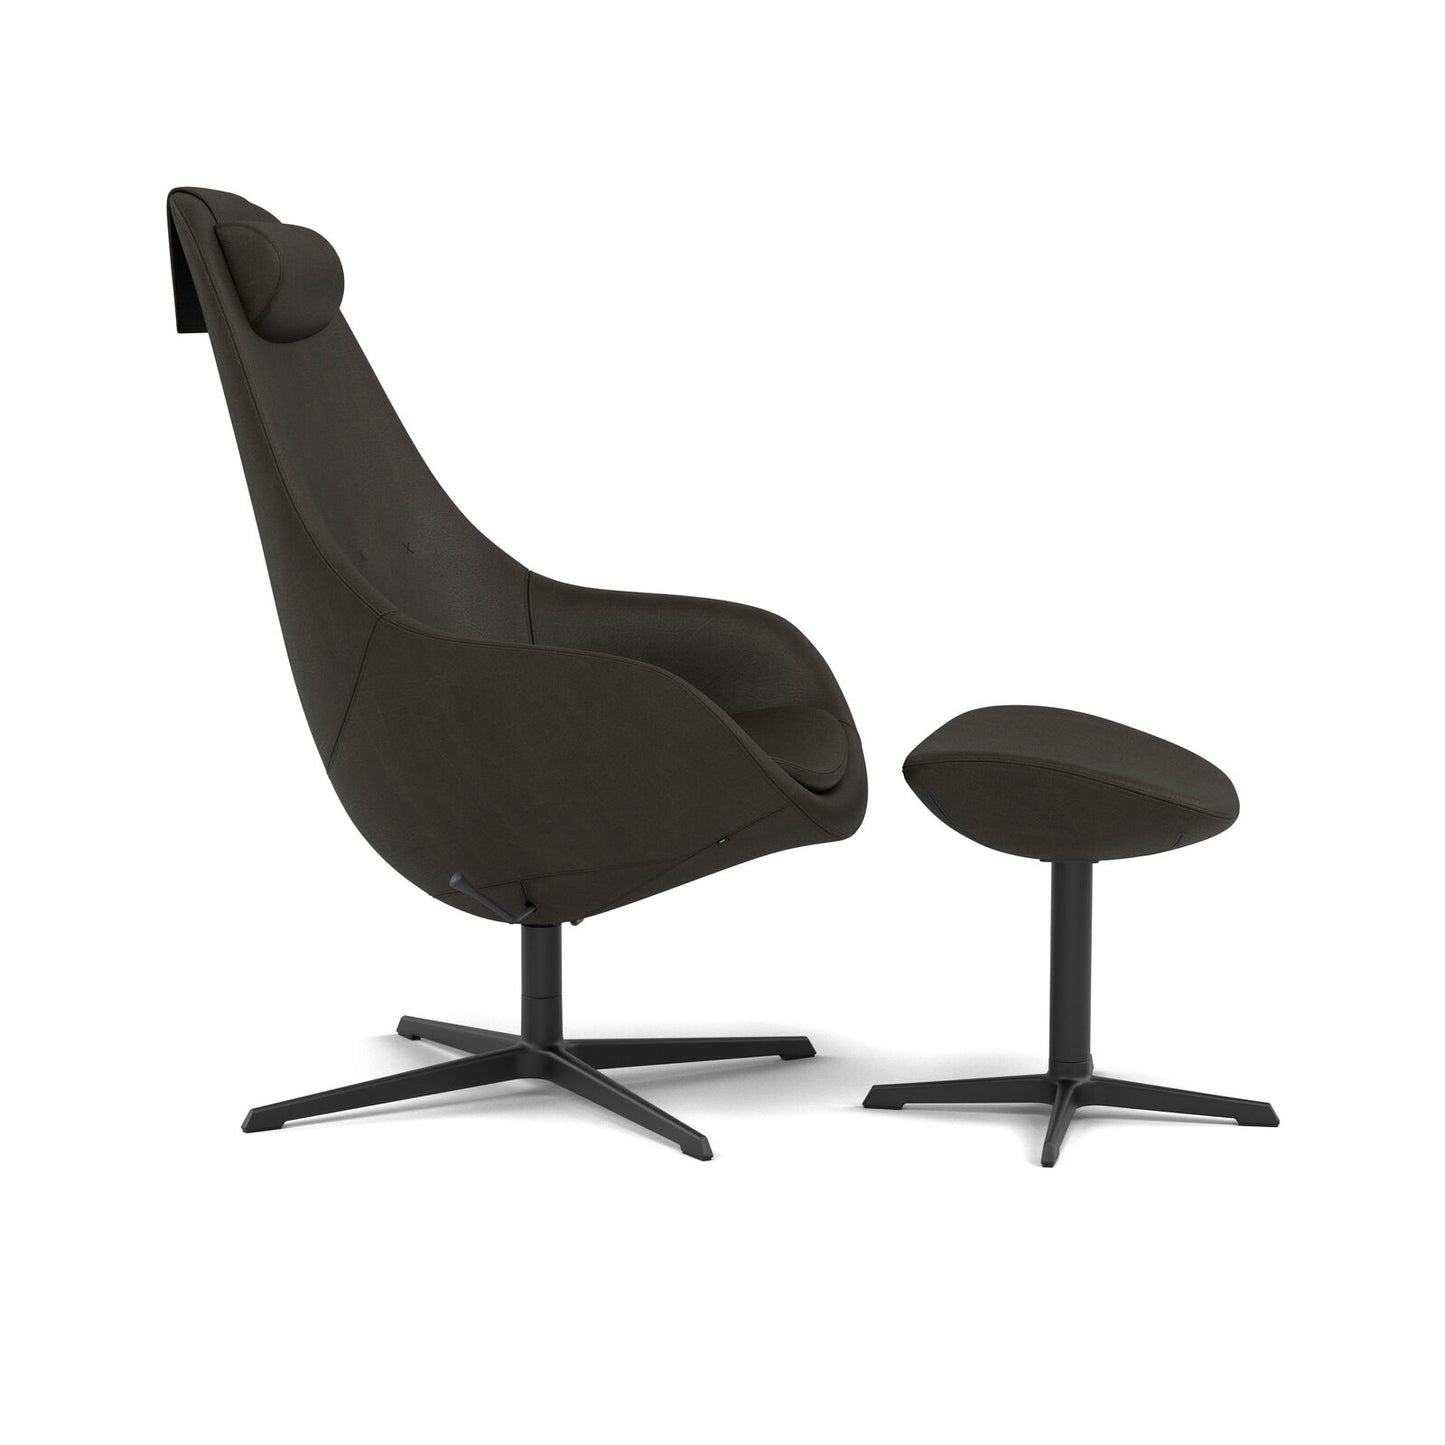 kokon with footrest chair by varier - black - view from the side